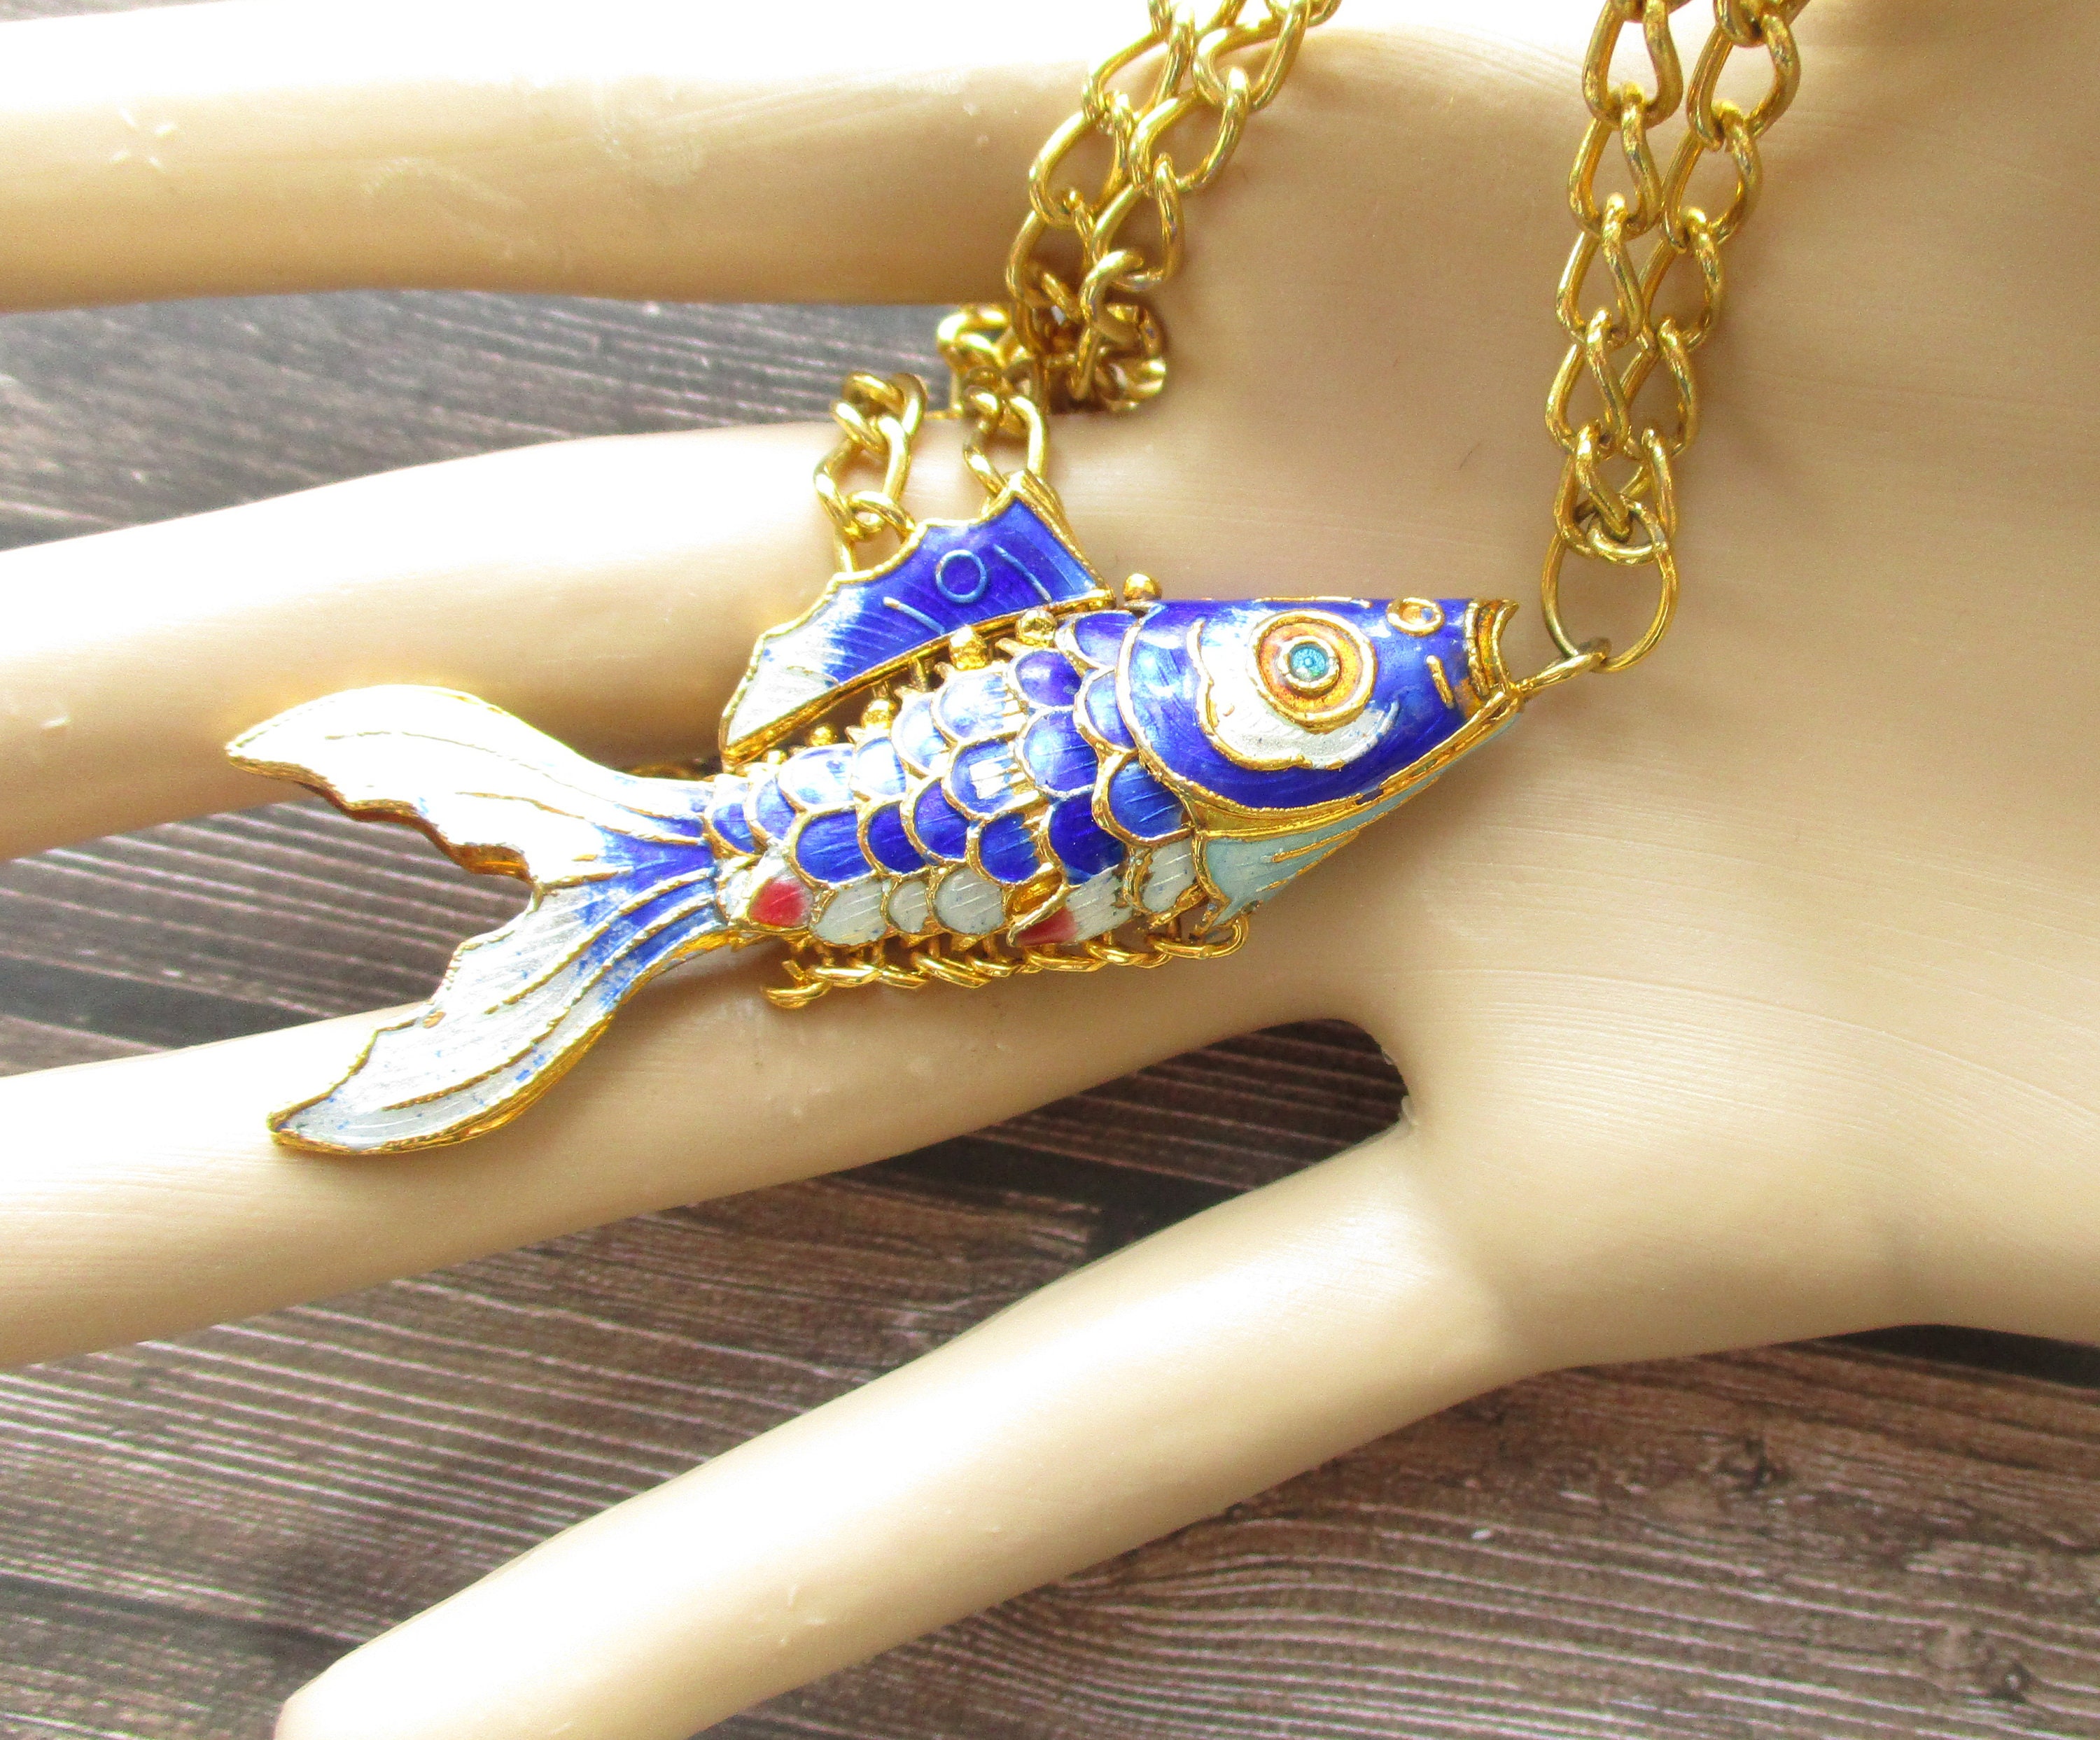 Jointed Fish Necklace With Chain Shows Incredible Detail